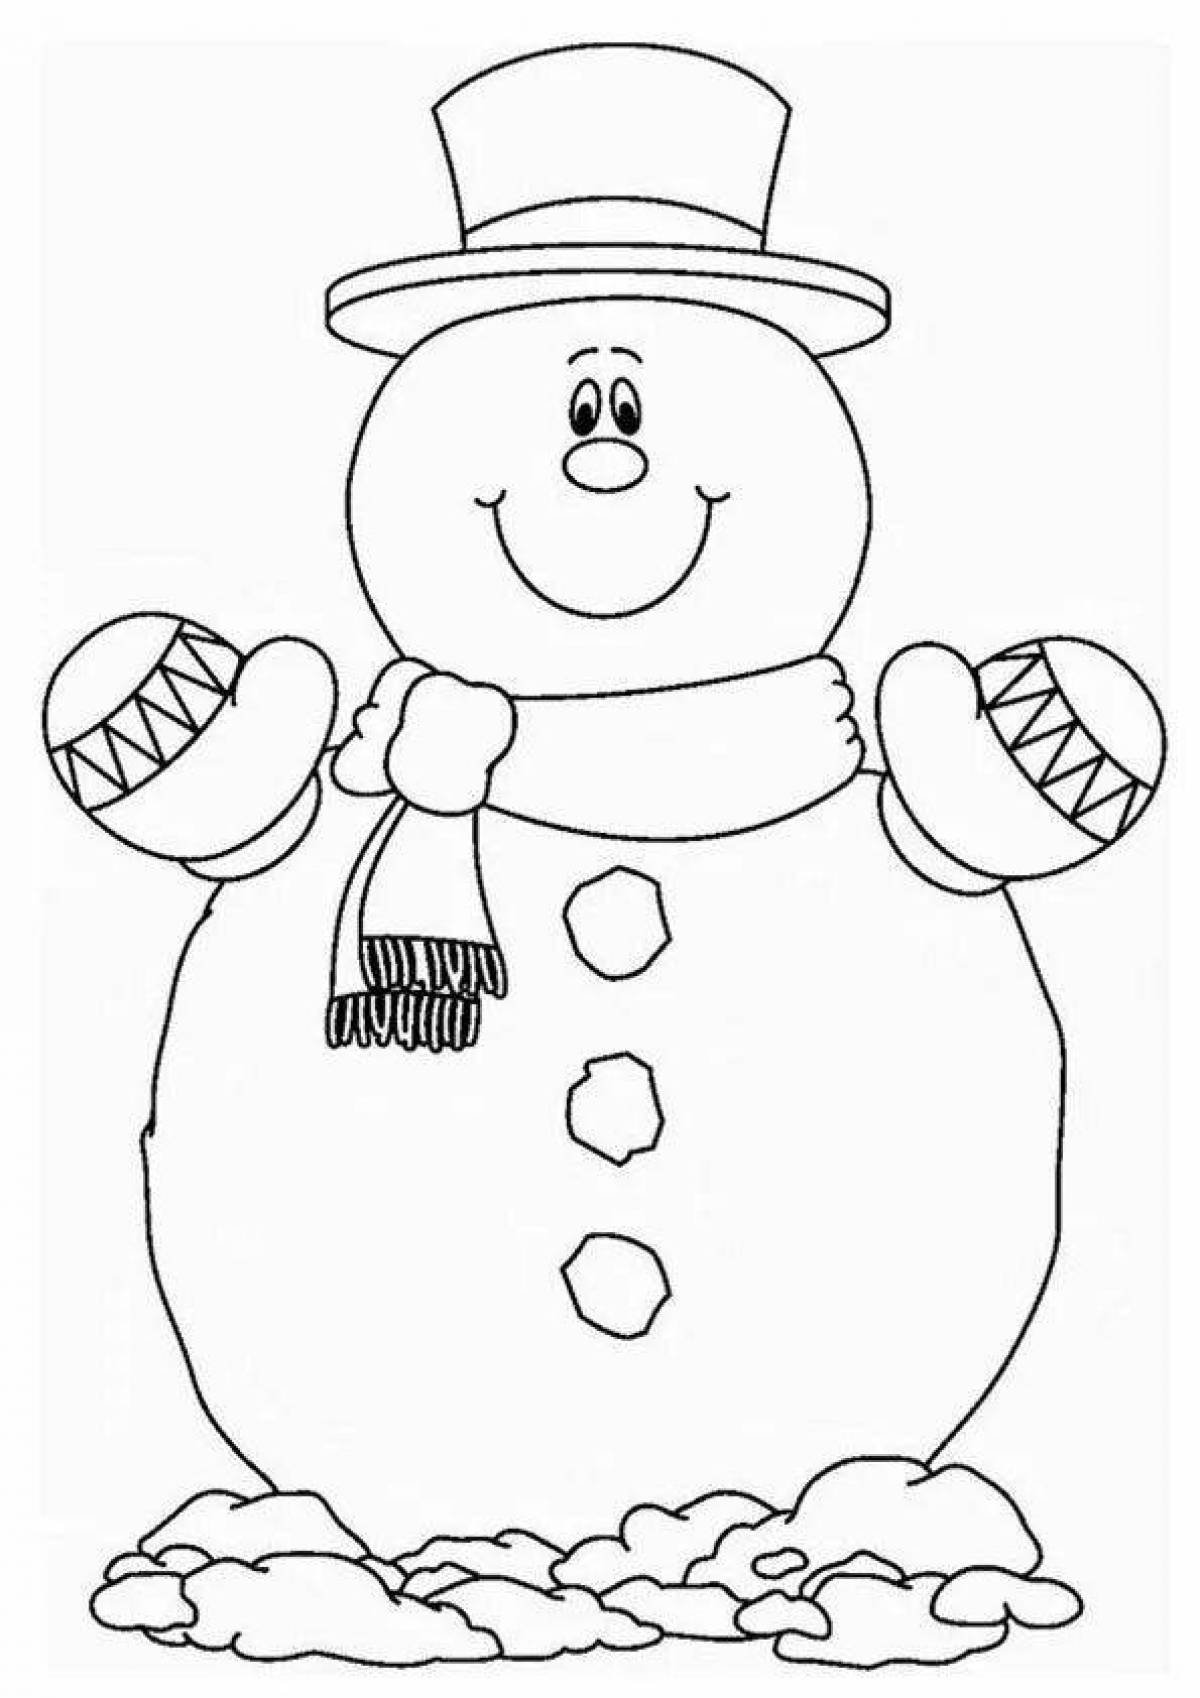 Deluxe snowman coloring book in color